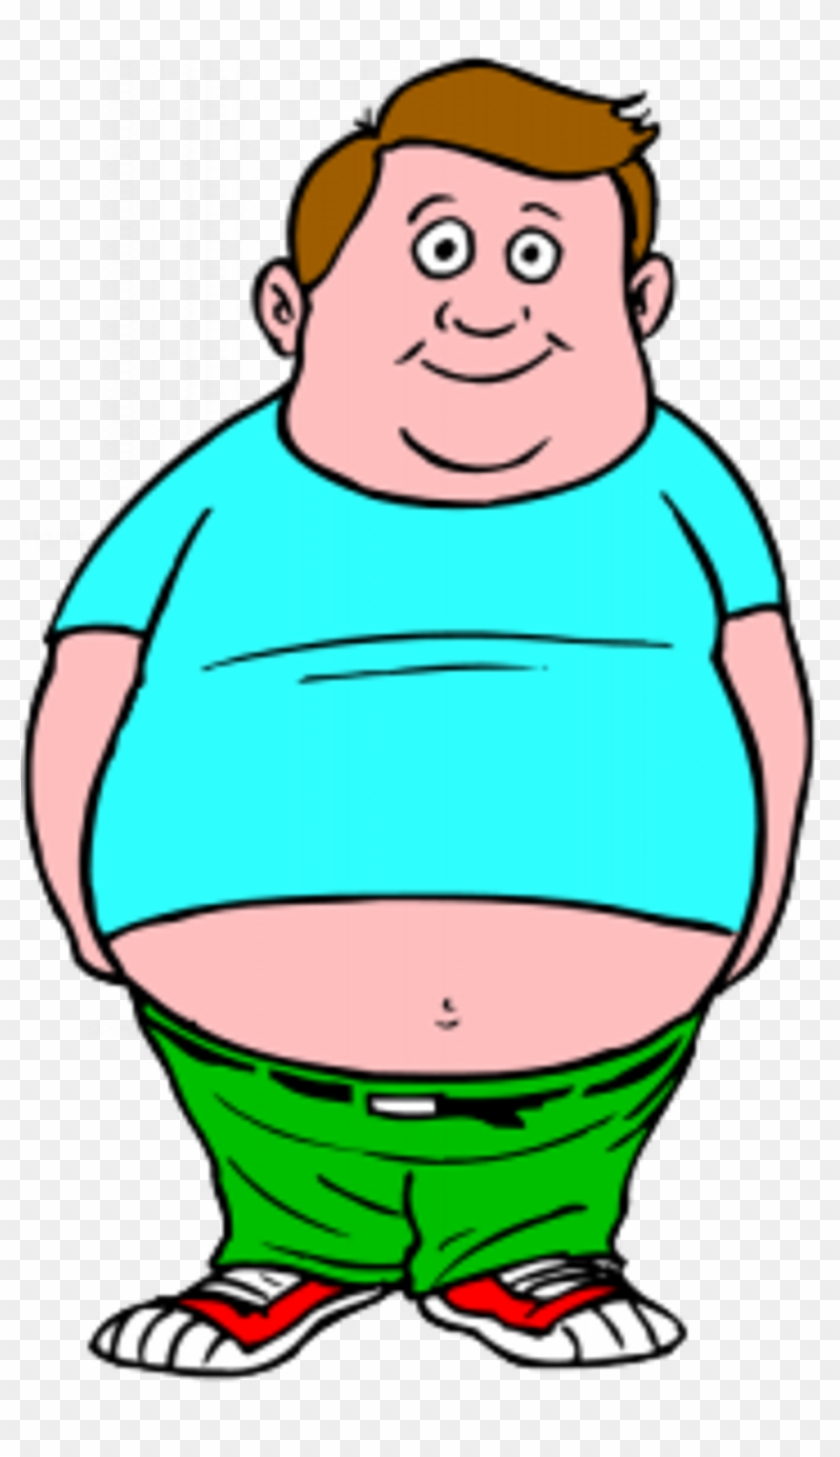 Free Fat Man Clipart, Download Free Fat Man Clipart png images, Free